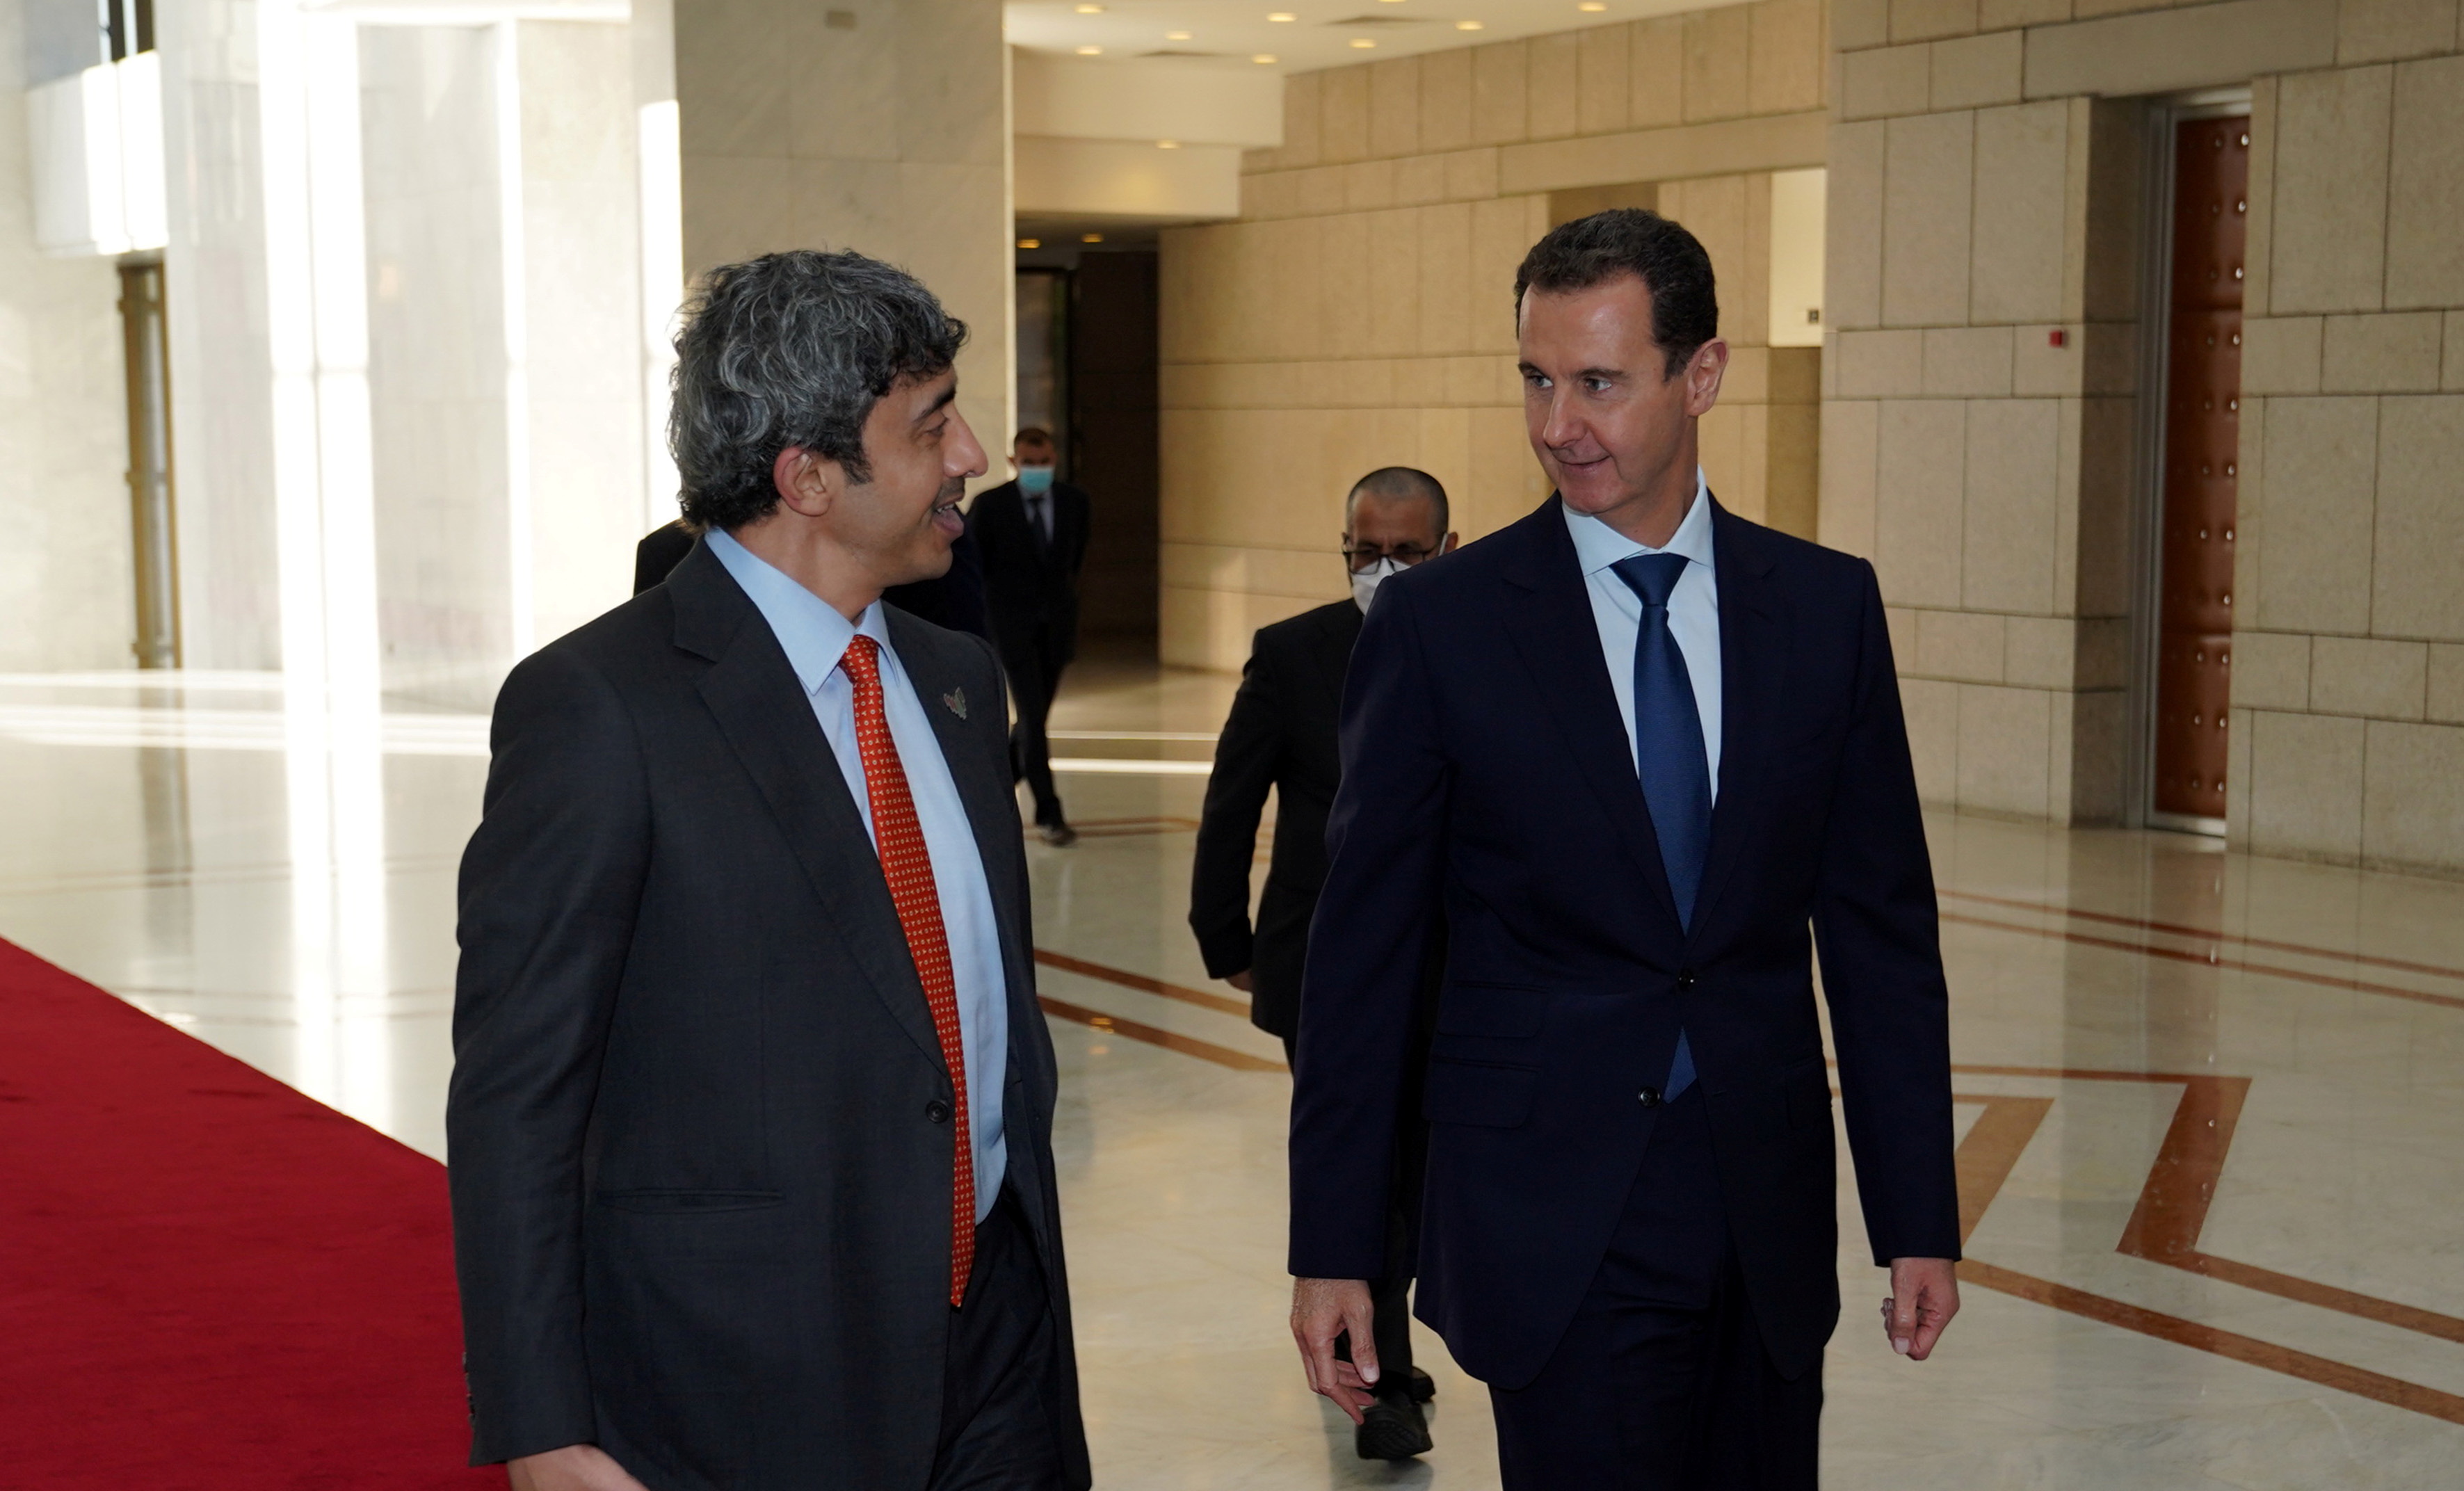 Syria's President Bashar al-Assad meets with United Arab Emirates Foreign Minister Sheikh Abdullah bin Zayed, in Damascus